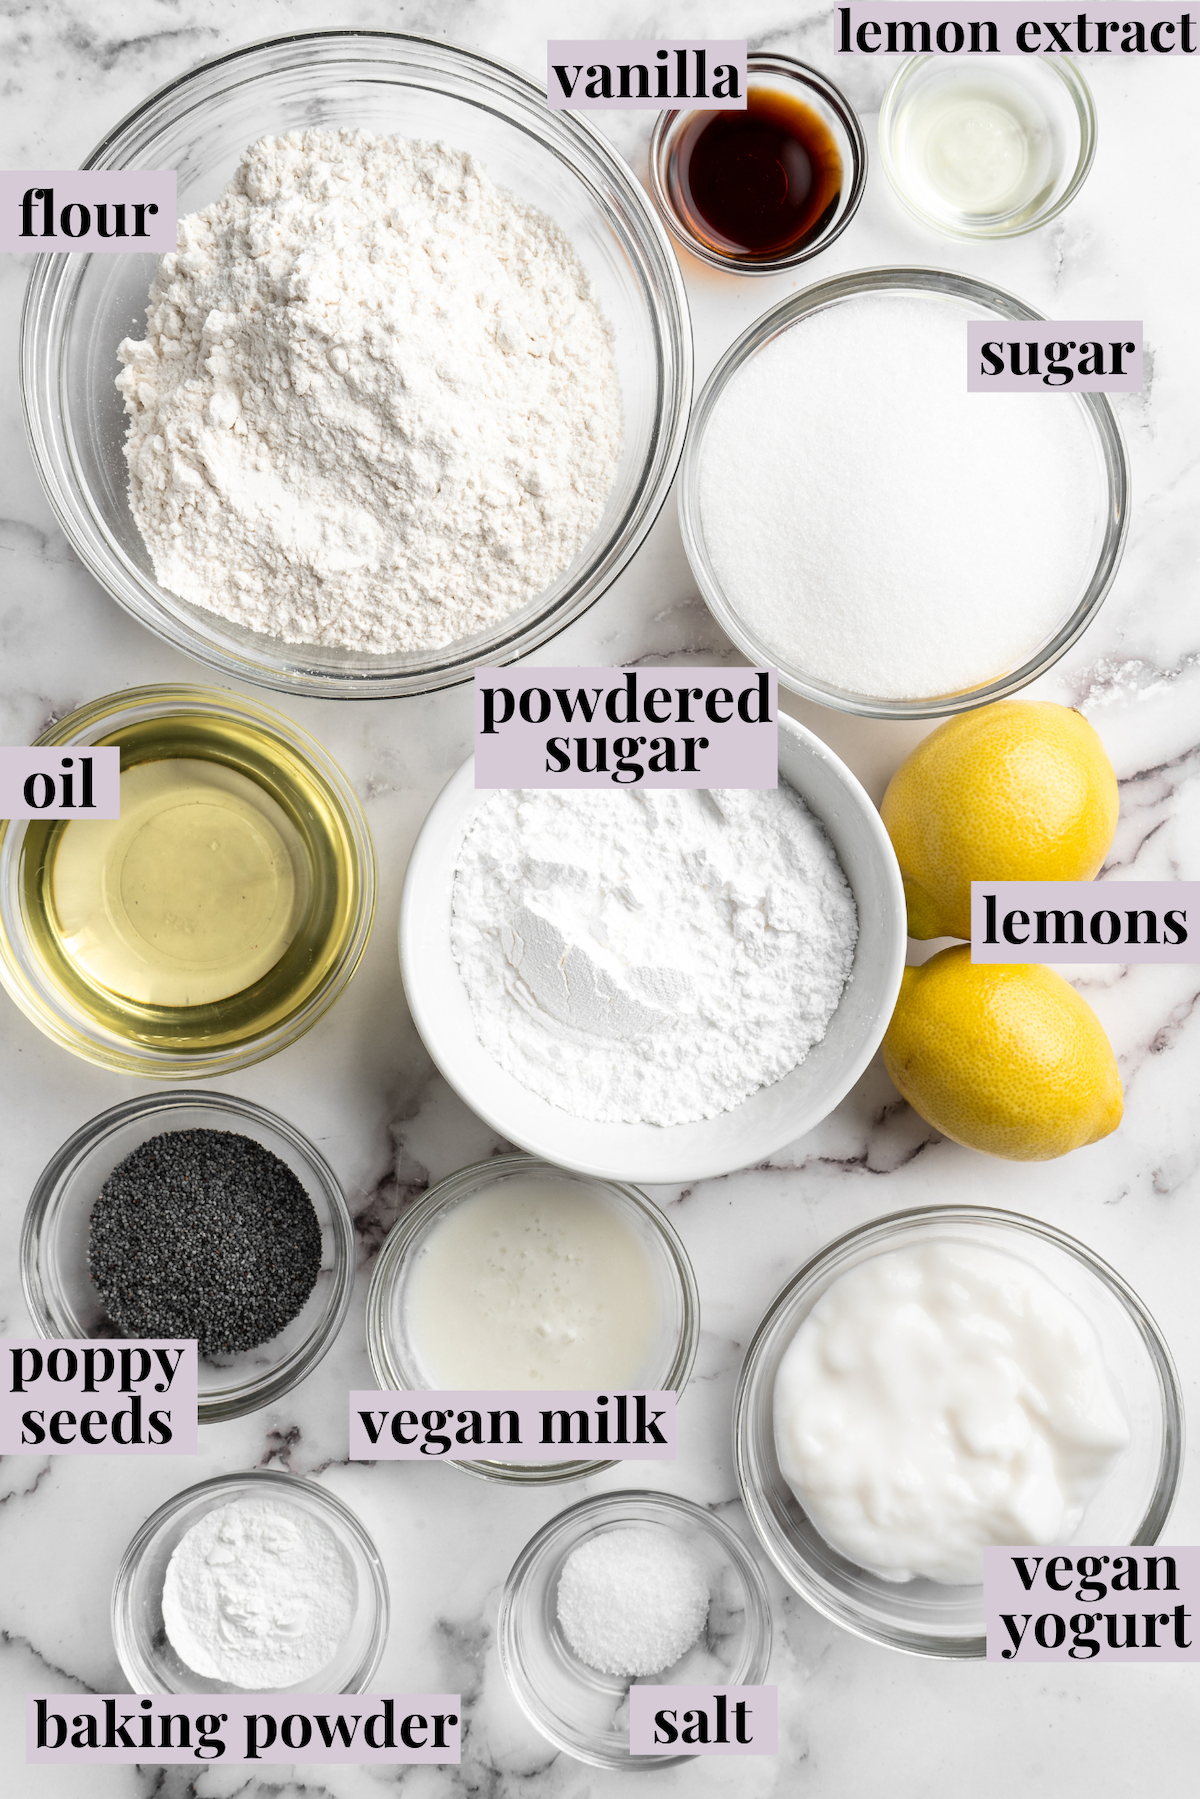 Overhead view of ingredients for vegan lemon poppyseed muffins with labels